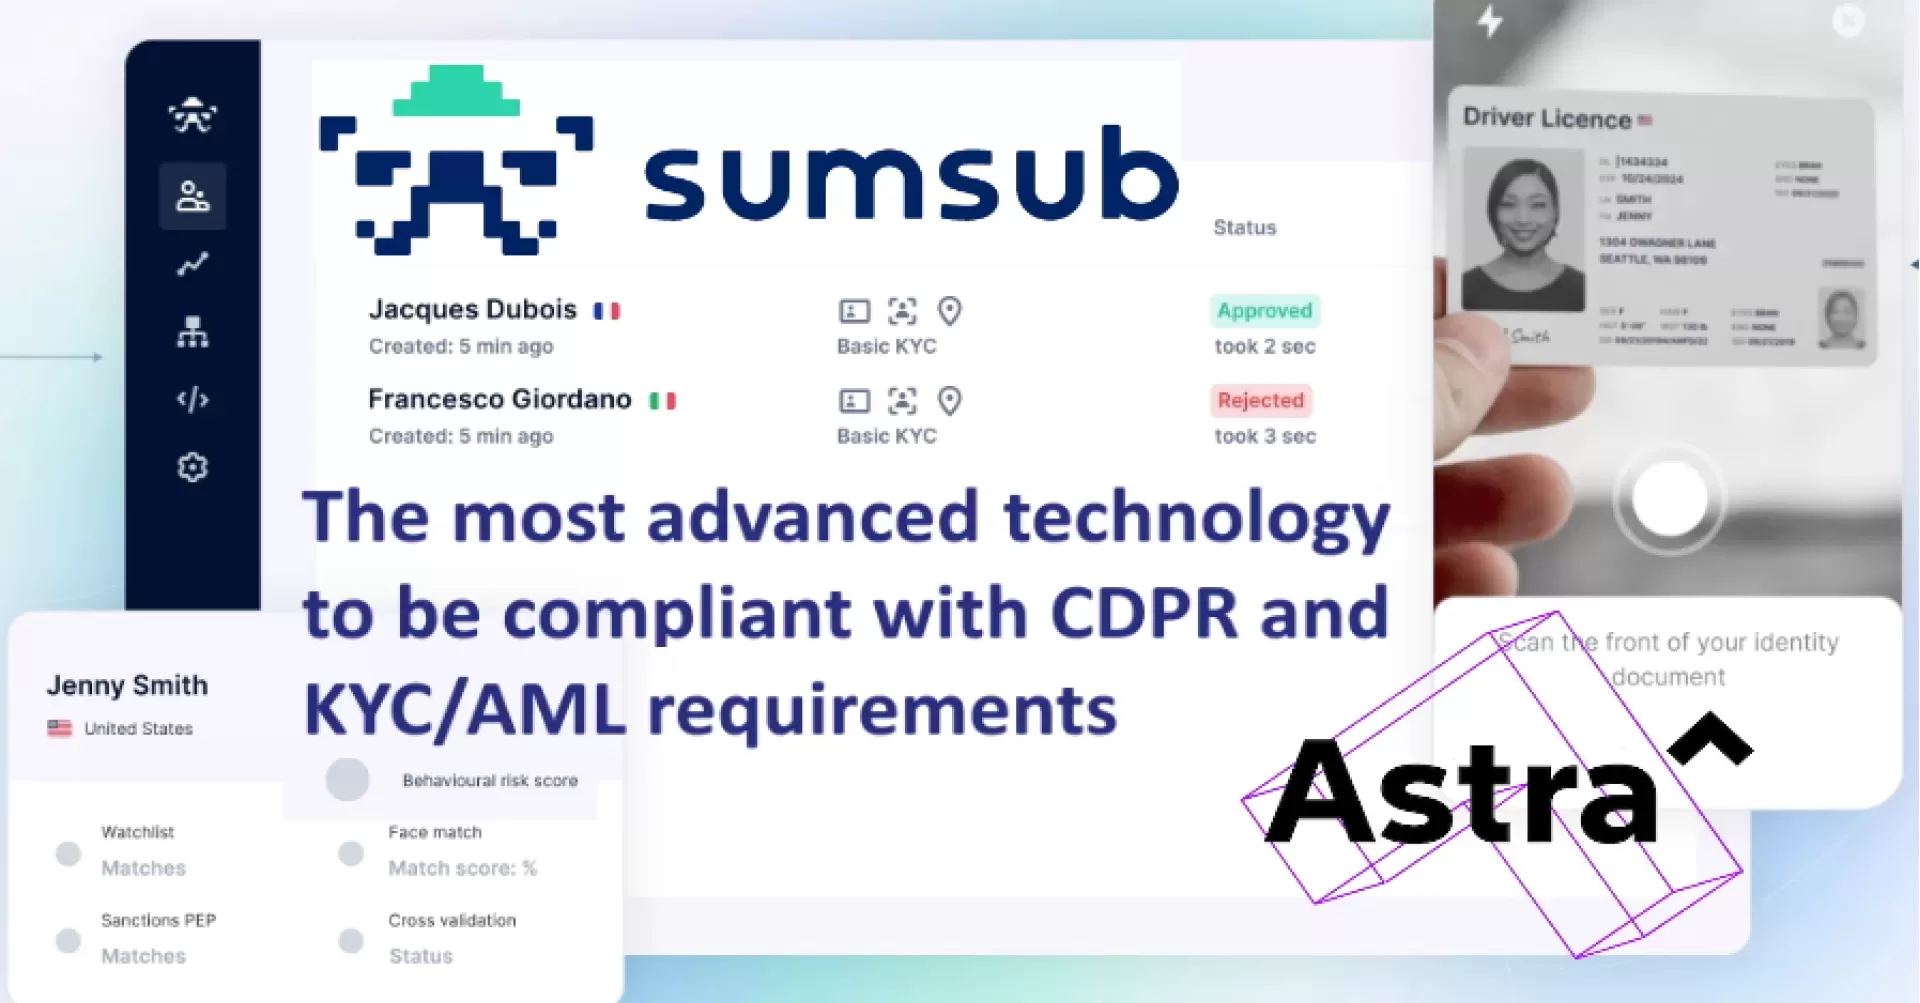 Integration of MetaAstra^ with Sumsub KYC/AML services